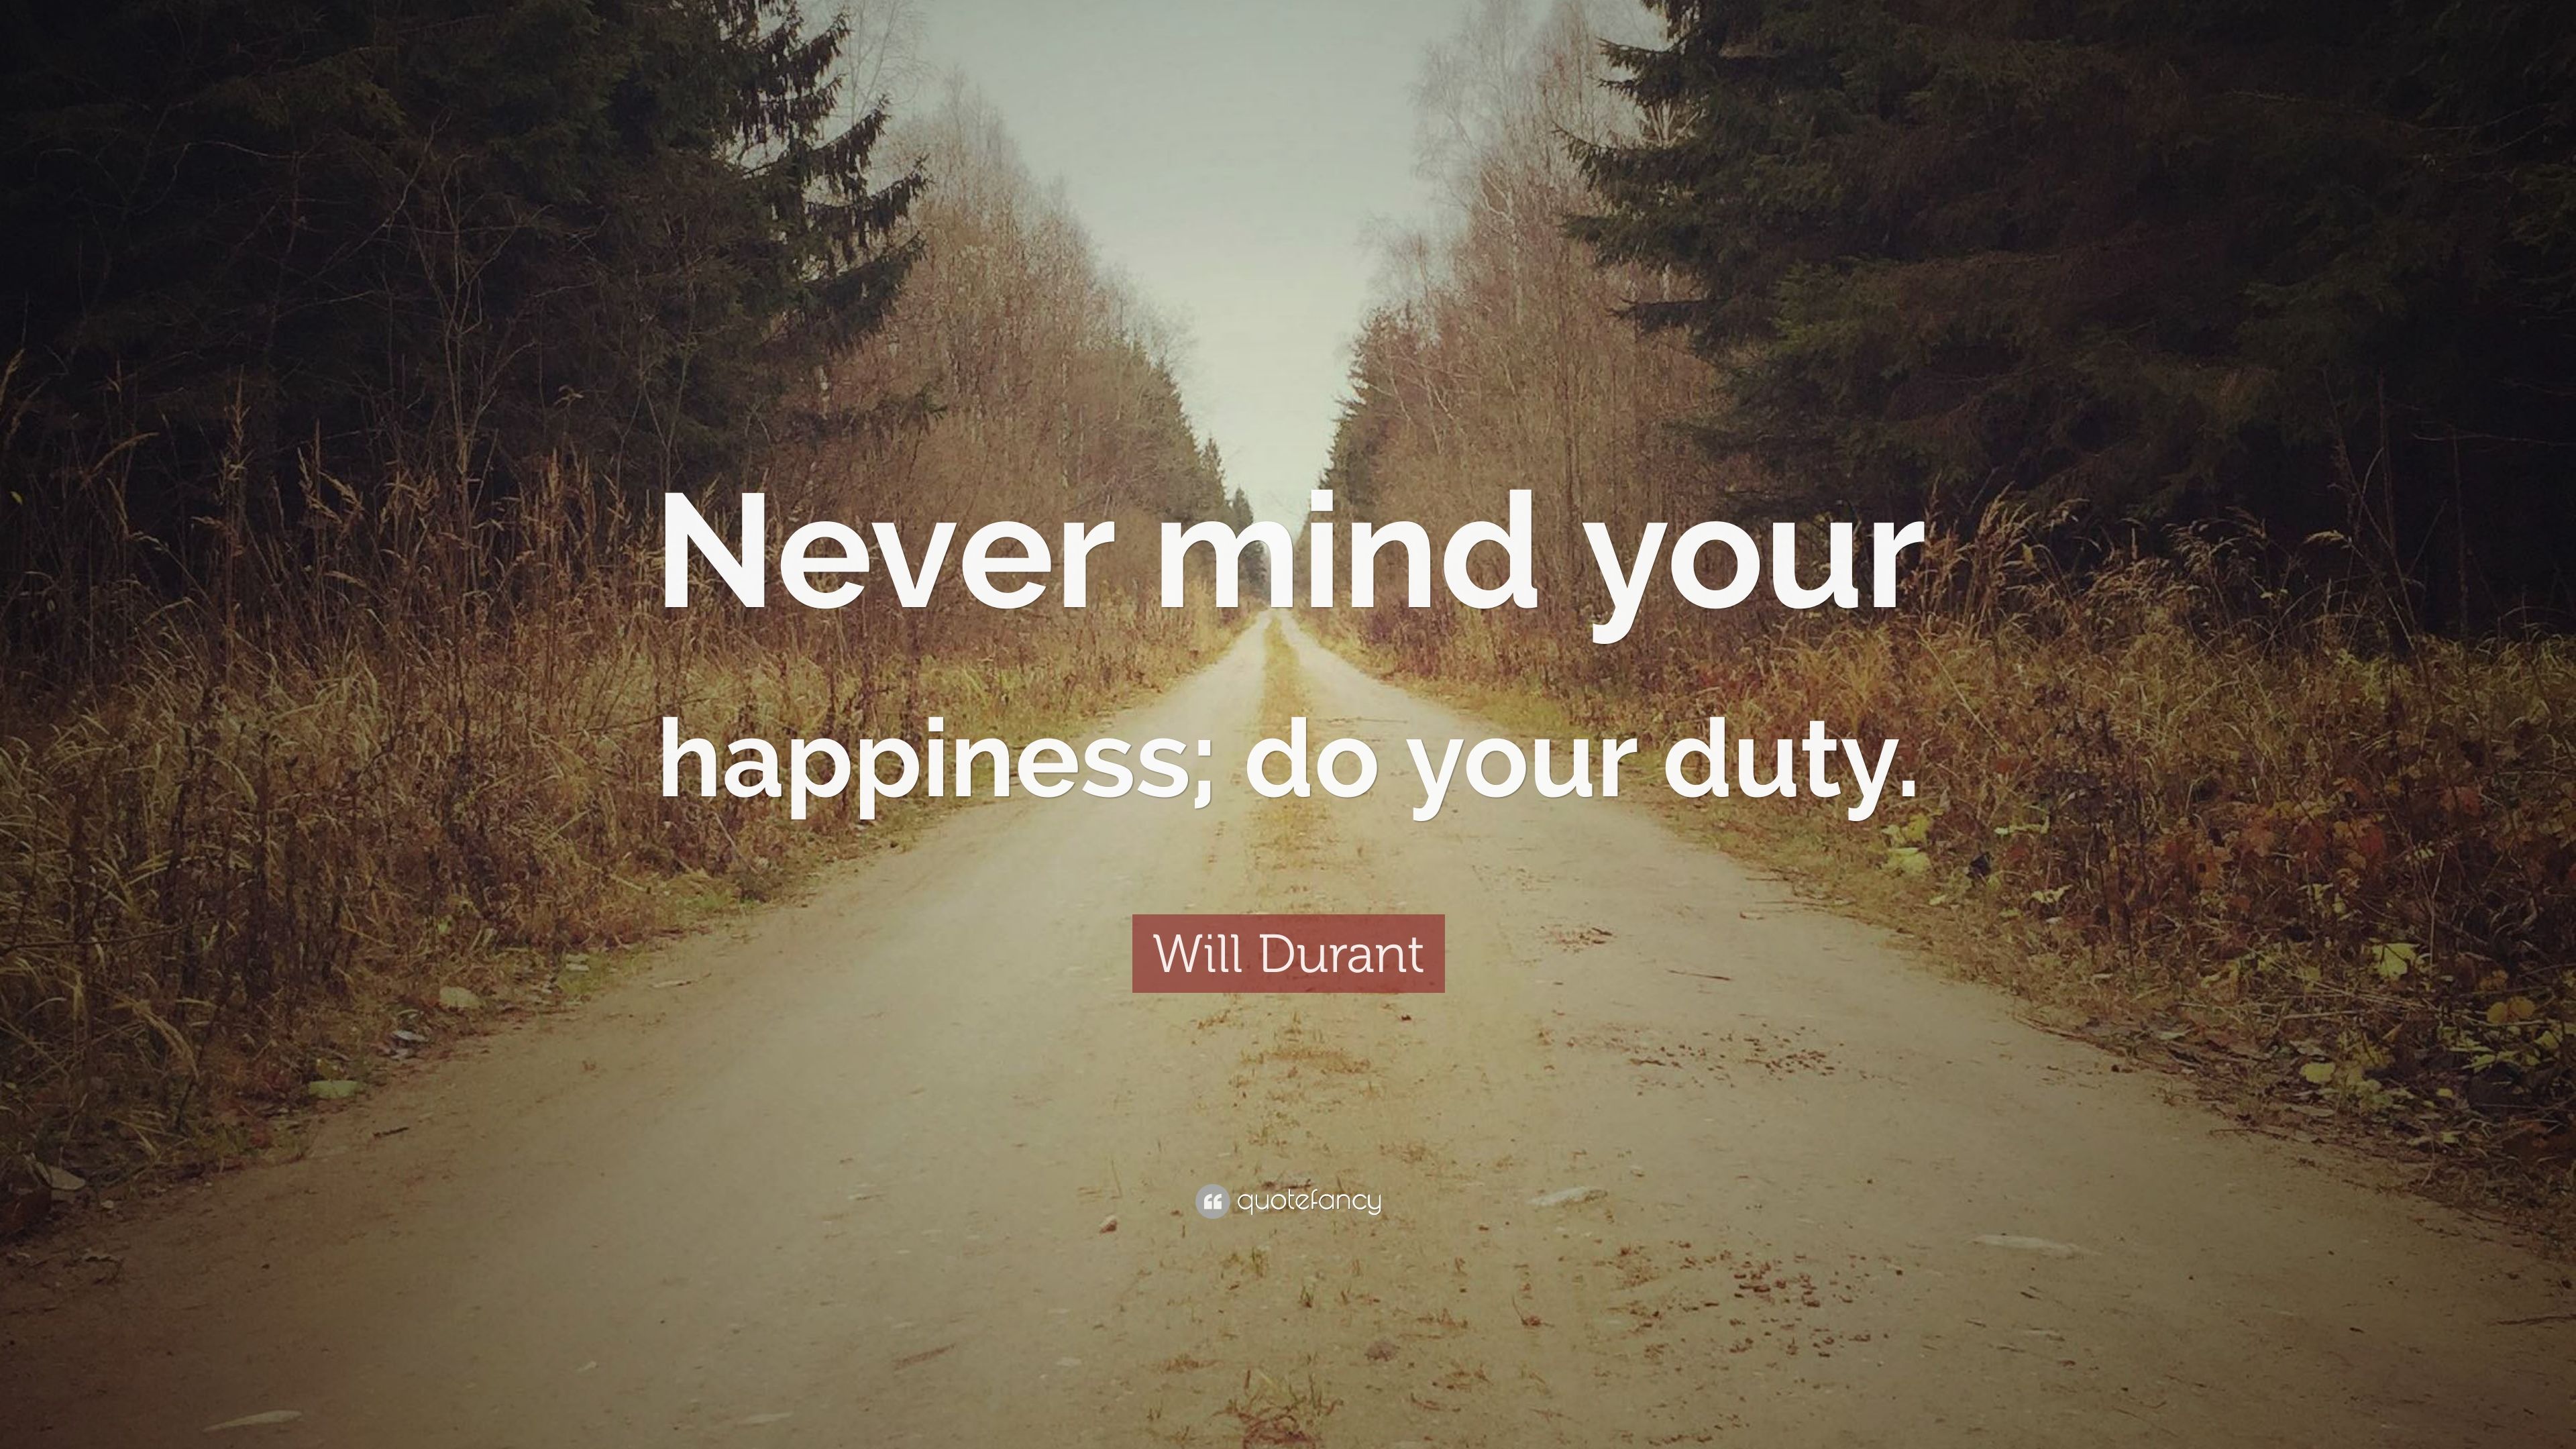 Will Durant Quote: “Never mind your happiness; do your duty.” 9